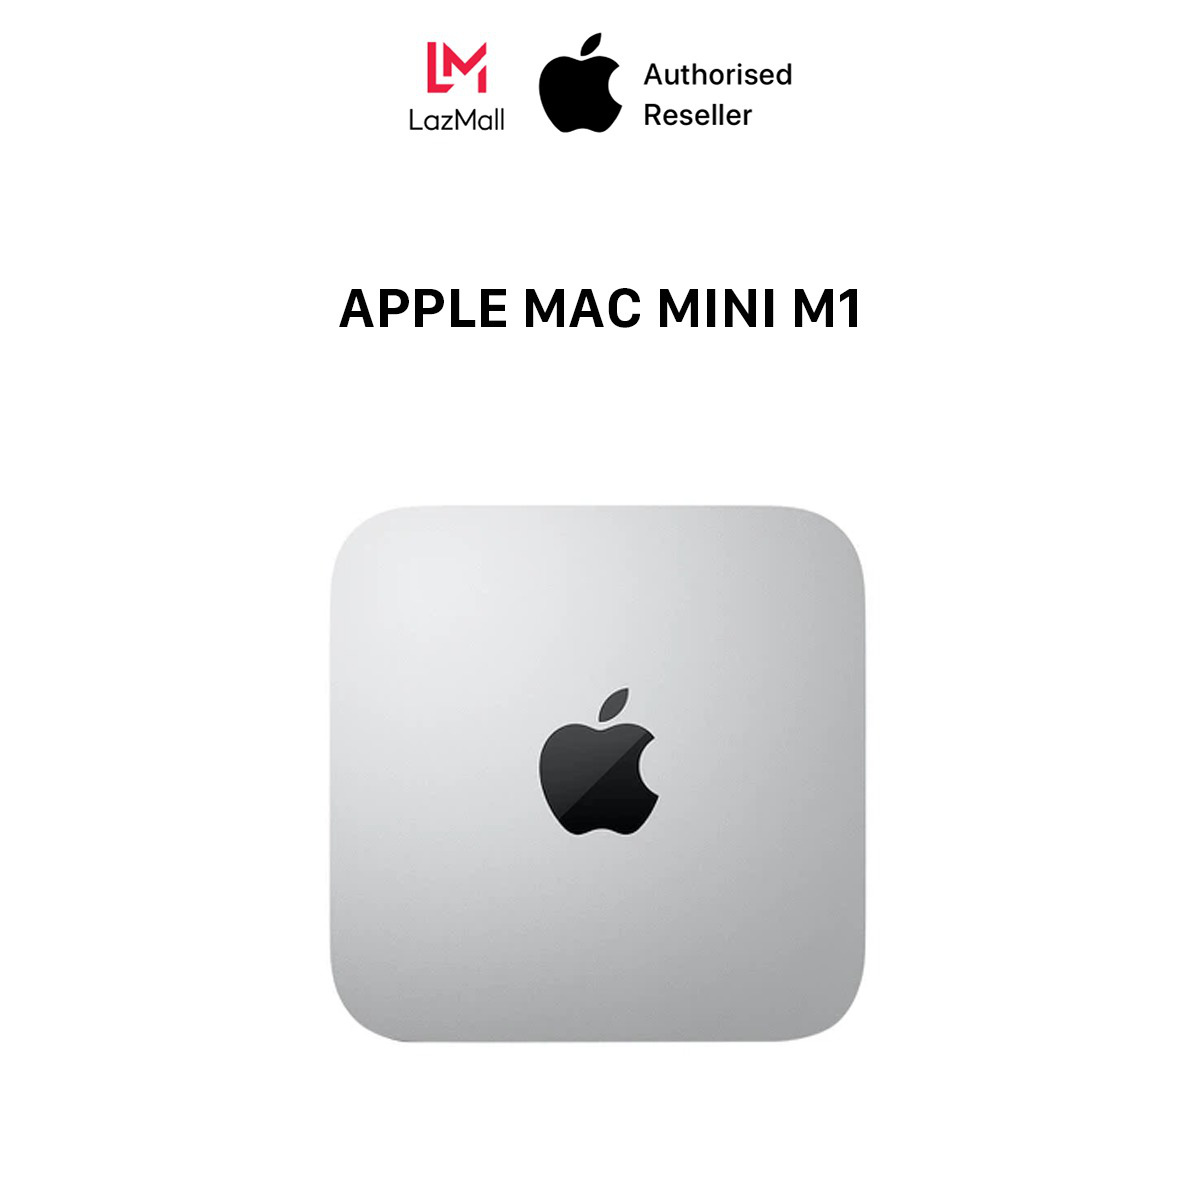 Massive tech sale on Cyber ​​Monday, Apple Mac Mini M1 is only half the price of iPhone 13 Pro Max - Photo 1.